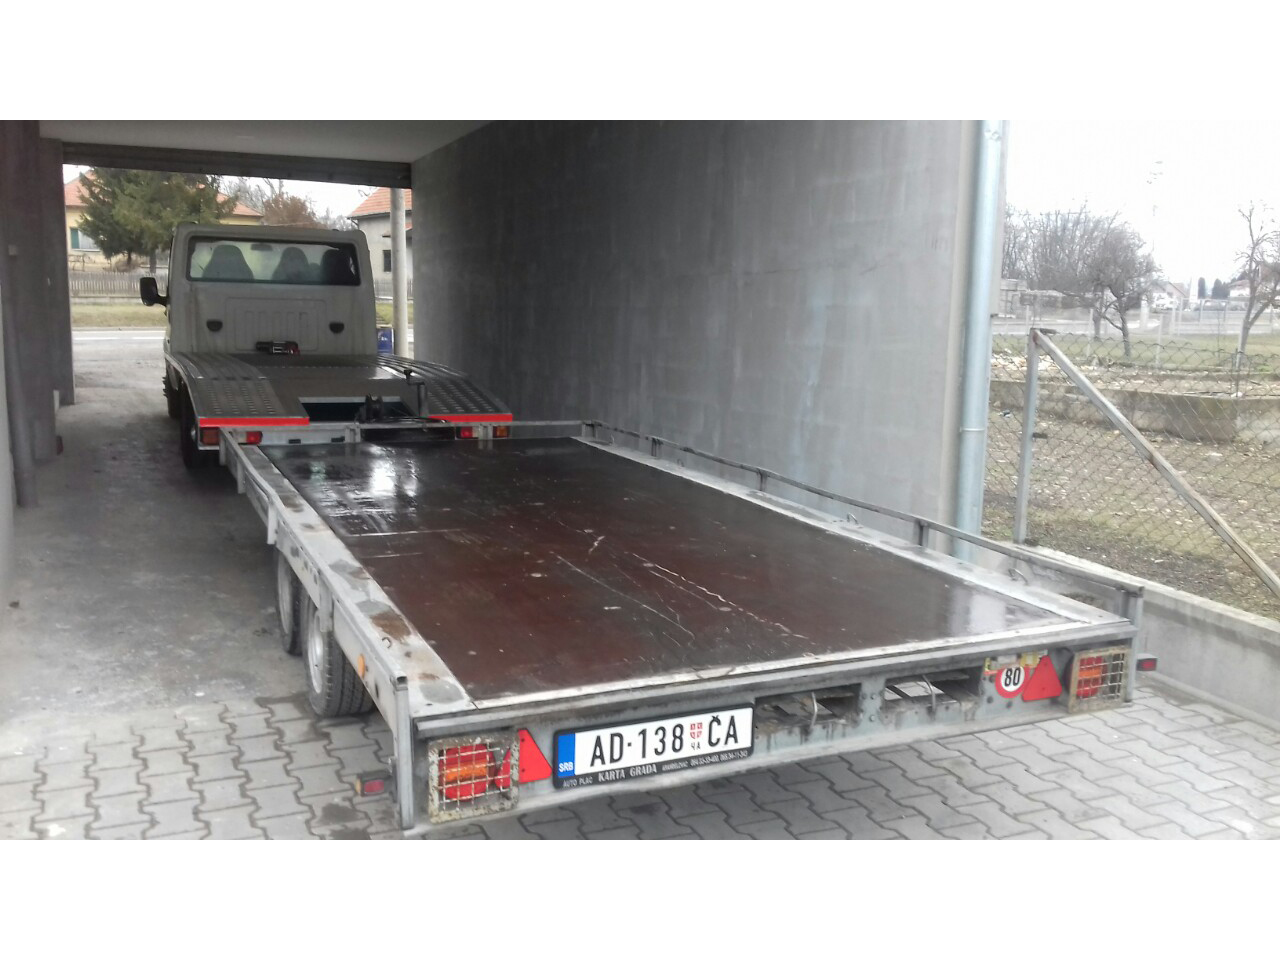 TOWING SERVICE  AS IVIC Used car parts Cacak - Photo 7